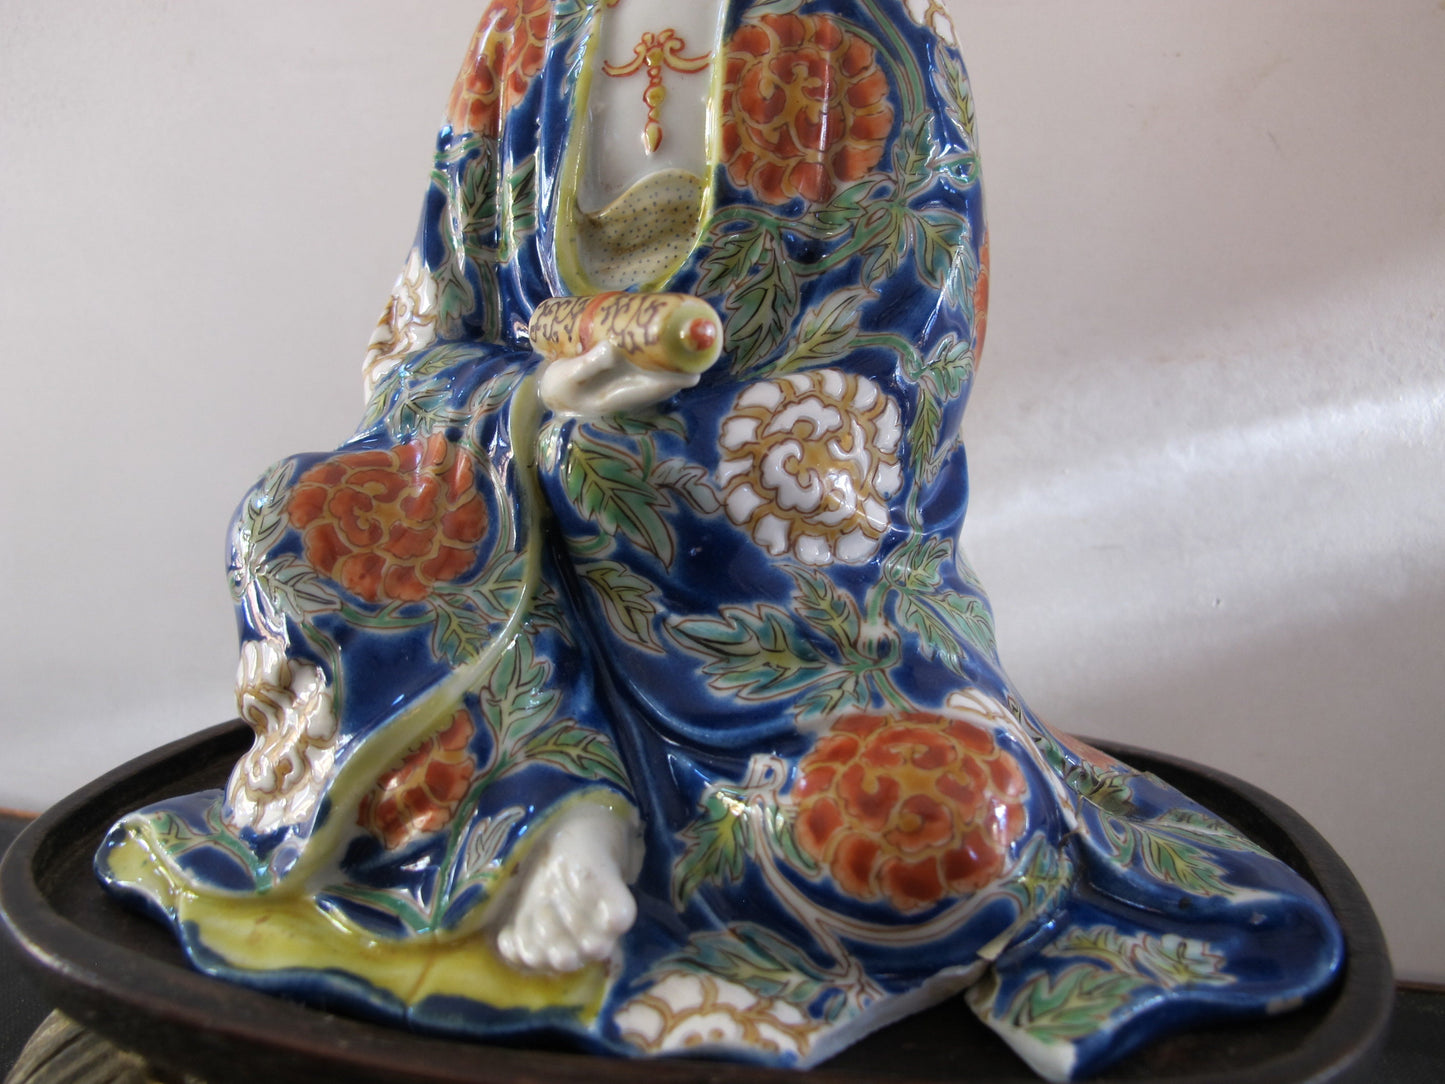 Statuette Guanyin Famille Bleu Chinese Polychrome Buddhist Bodhisattva Porcelain c. 1900 on Lotus Stand Skinner Auctioneers Tag Precommunist